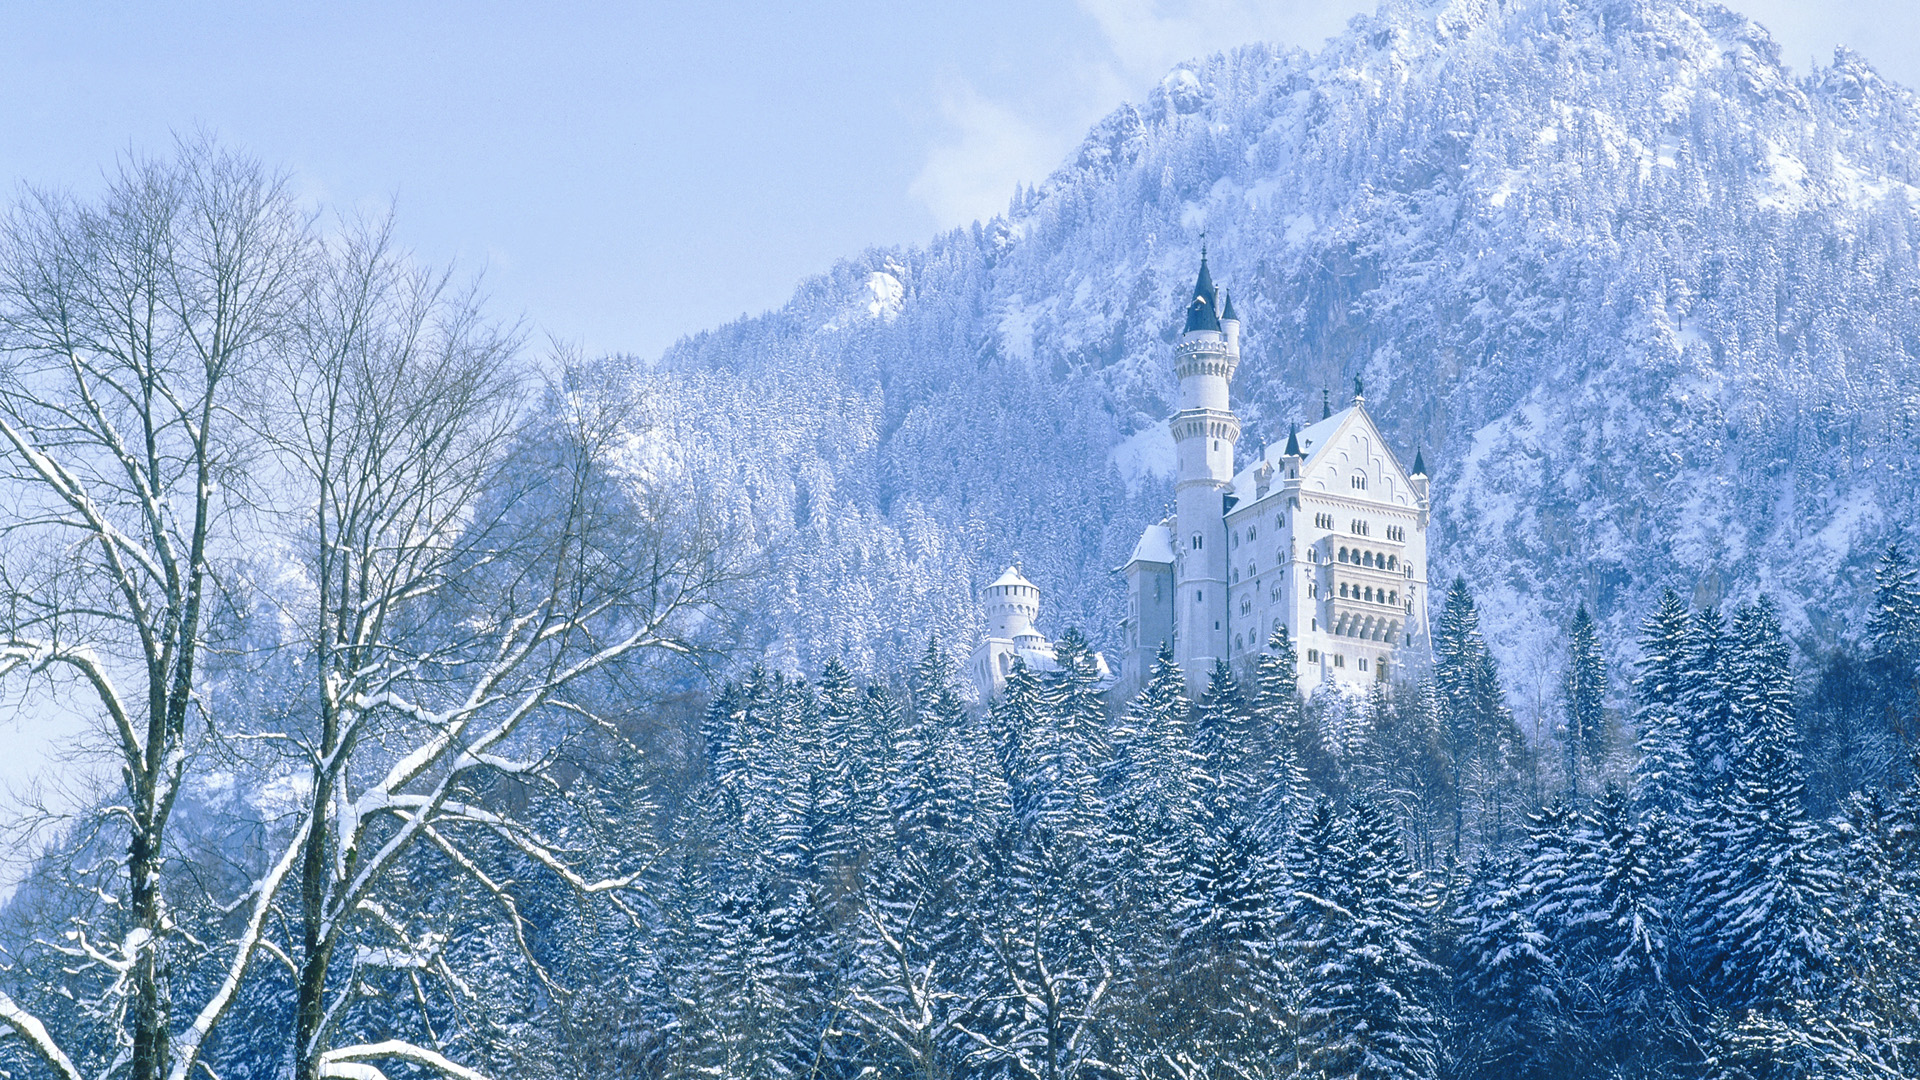 Download mobile wallpaper Winter, Snow, Castles, Building, Mountain, Forest, Tree, Germany, Neuschwanstein Castle, Man Made, Castle for free.